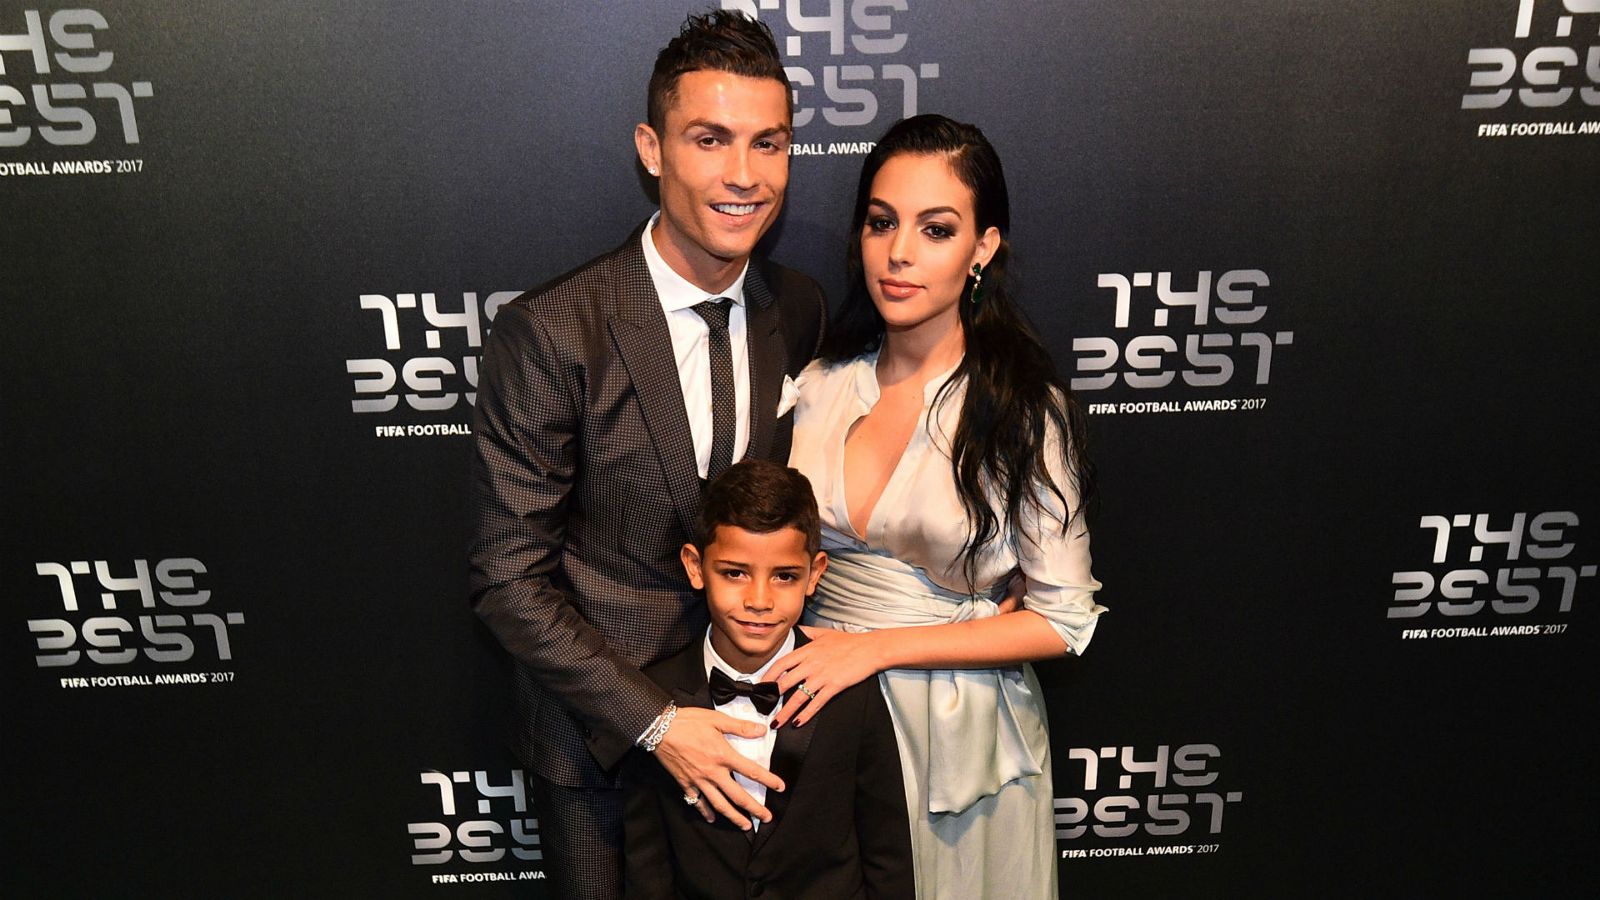 Georgina Rodríguez: Age, Family and Facts About Cristiano Ronaldo’s Wife